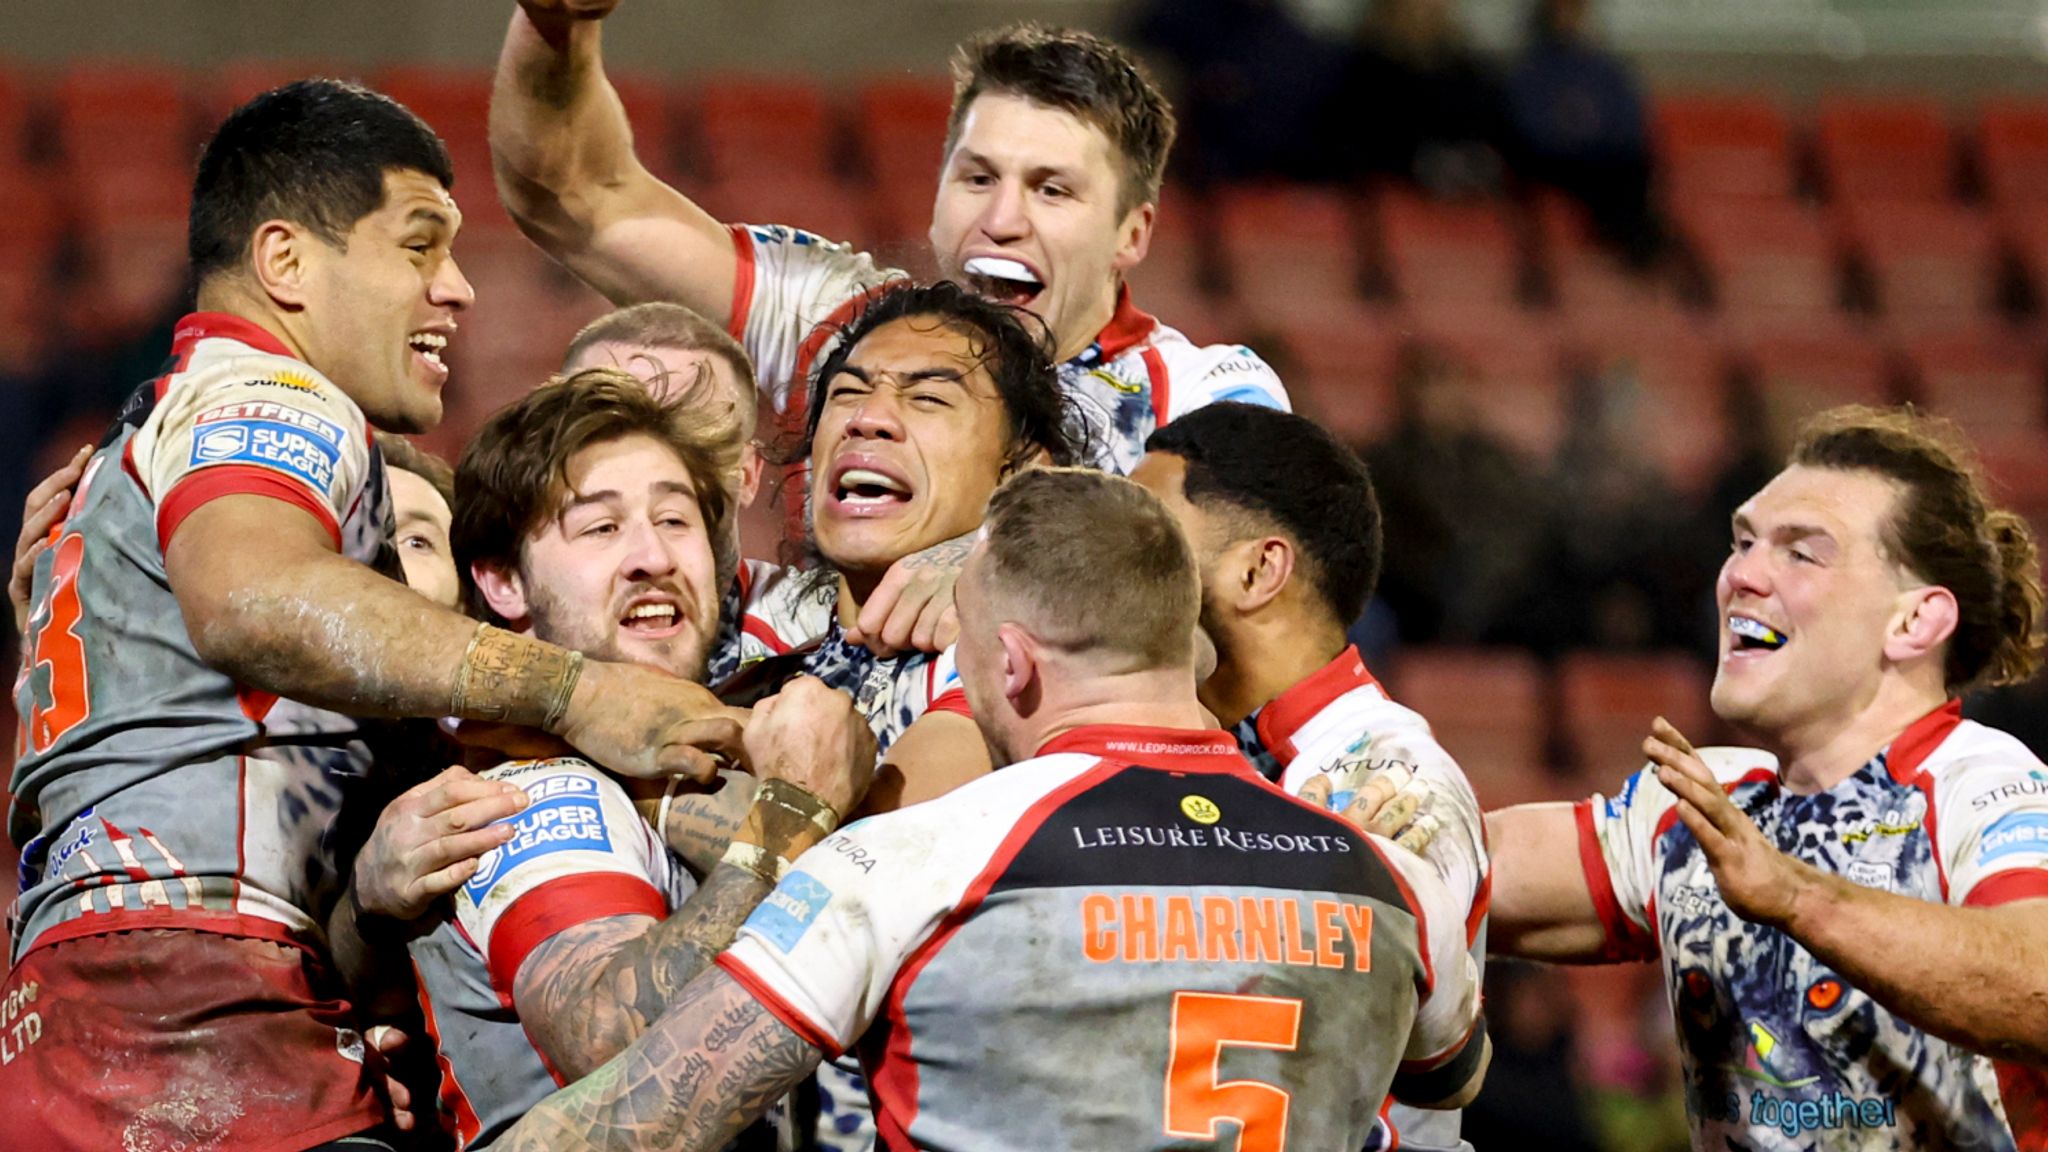 Super League Leigh stun St Helens Castleford beaten Wolves edge out Hull KR Wakefield continue to fire blanks Rugby League News Sky Sports